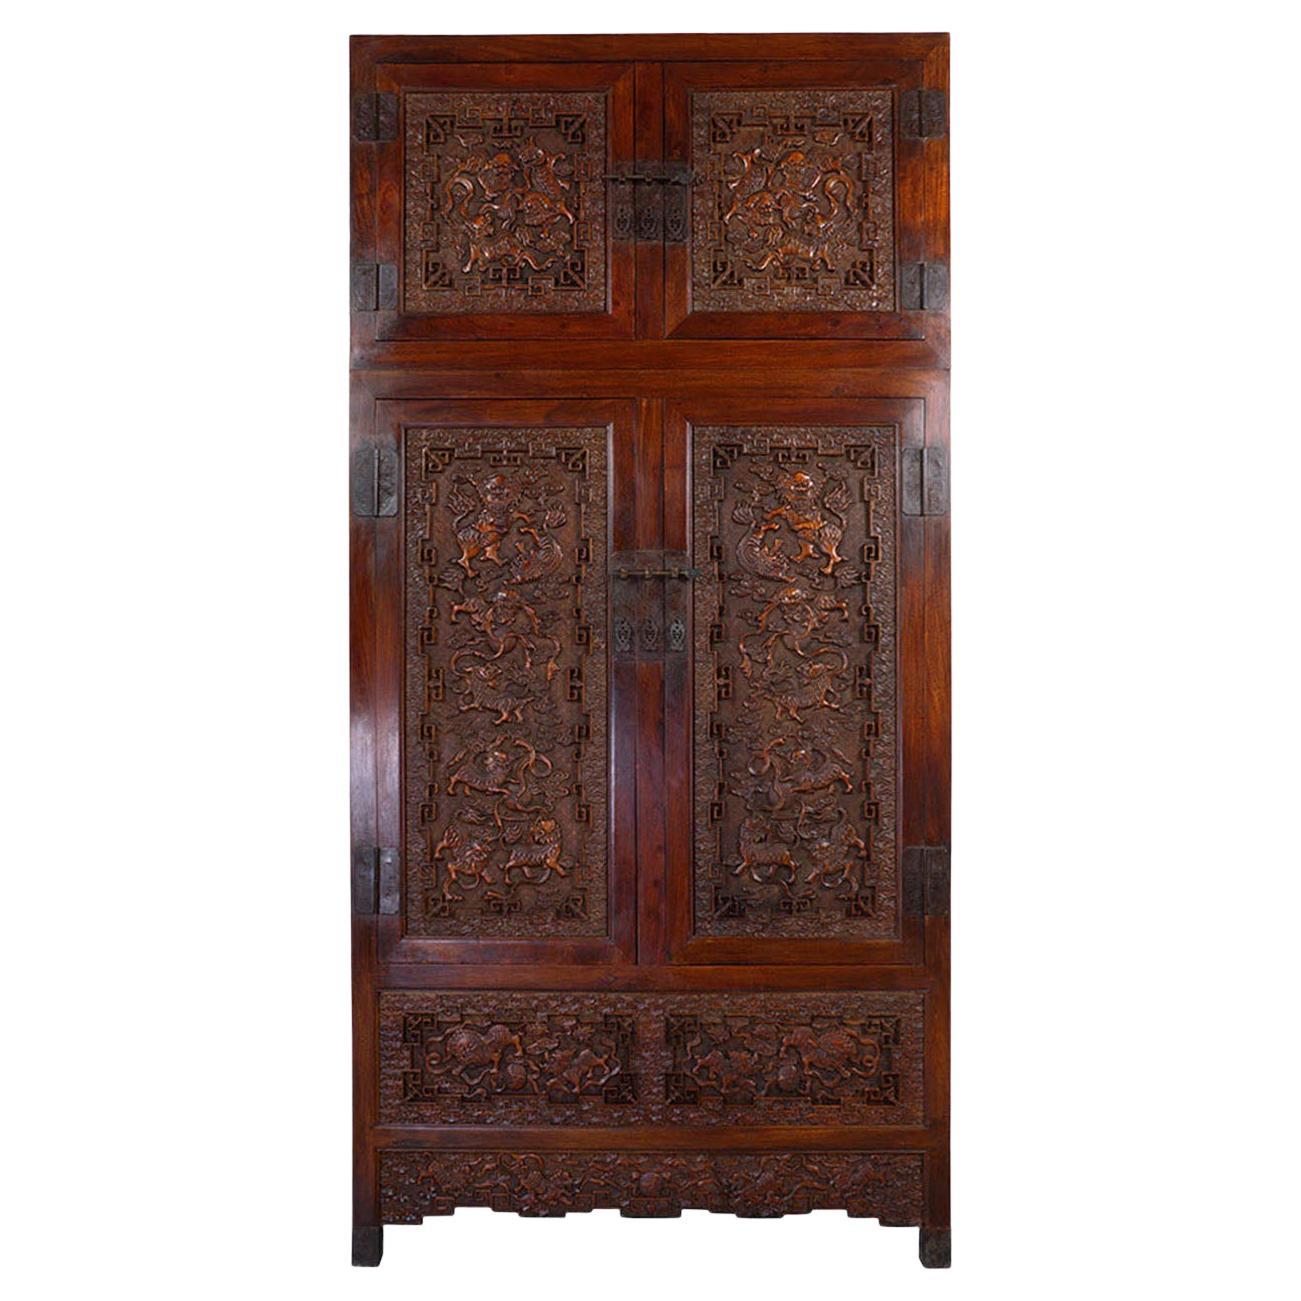 Antique Chinese Massive Carved Camphor Wood Compound Cabinet, Wardrobe For Sale